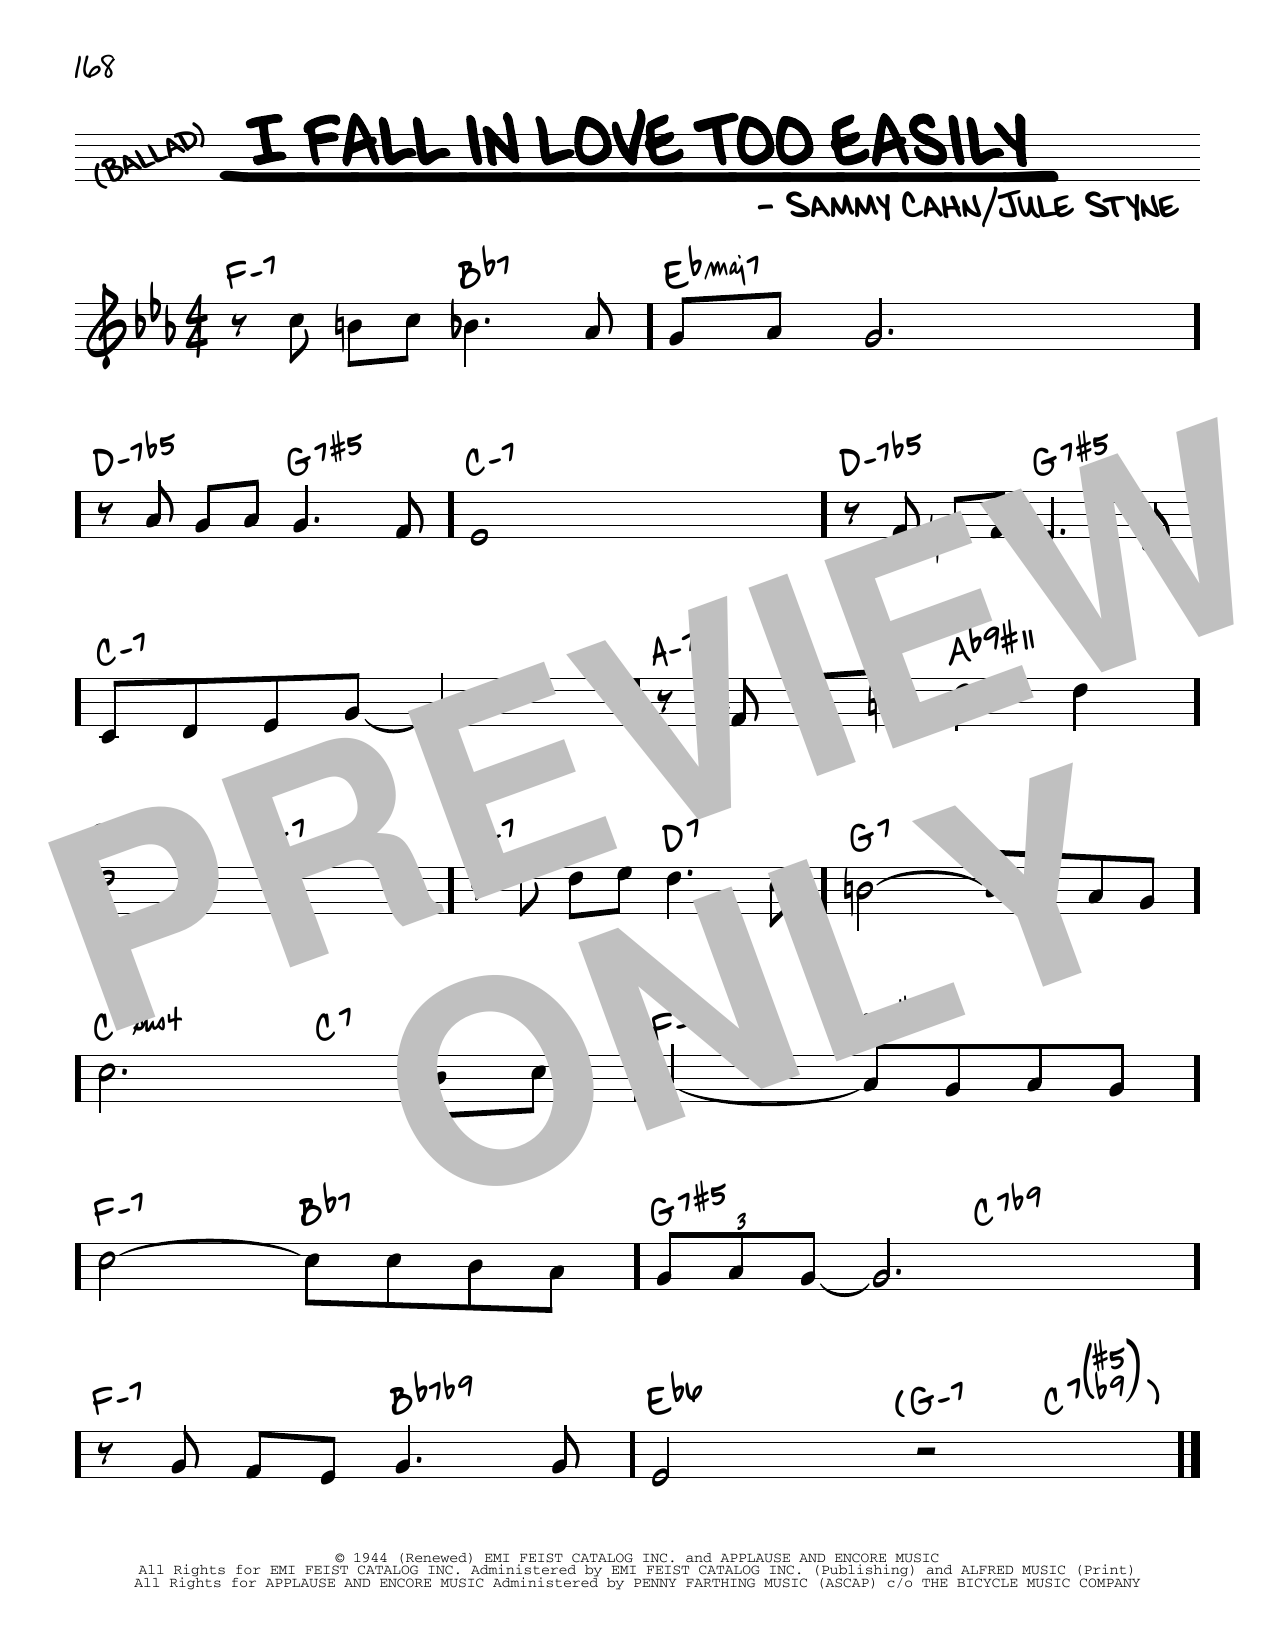 Download Jule Styne and Sammy Cahn I Fall In Love Too Easily Sheet Music